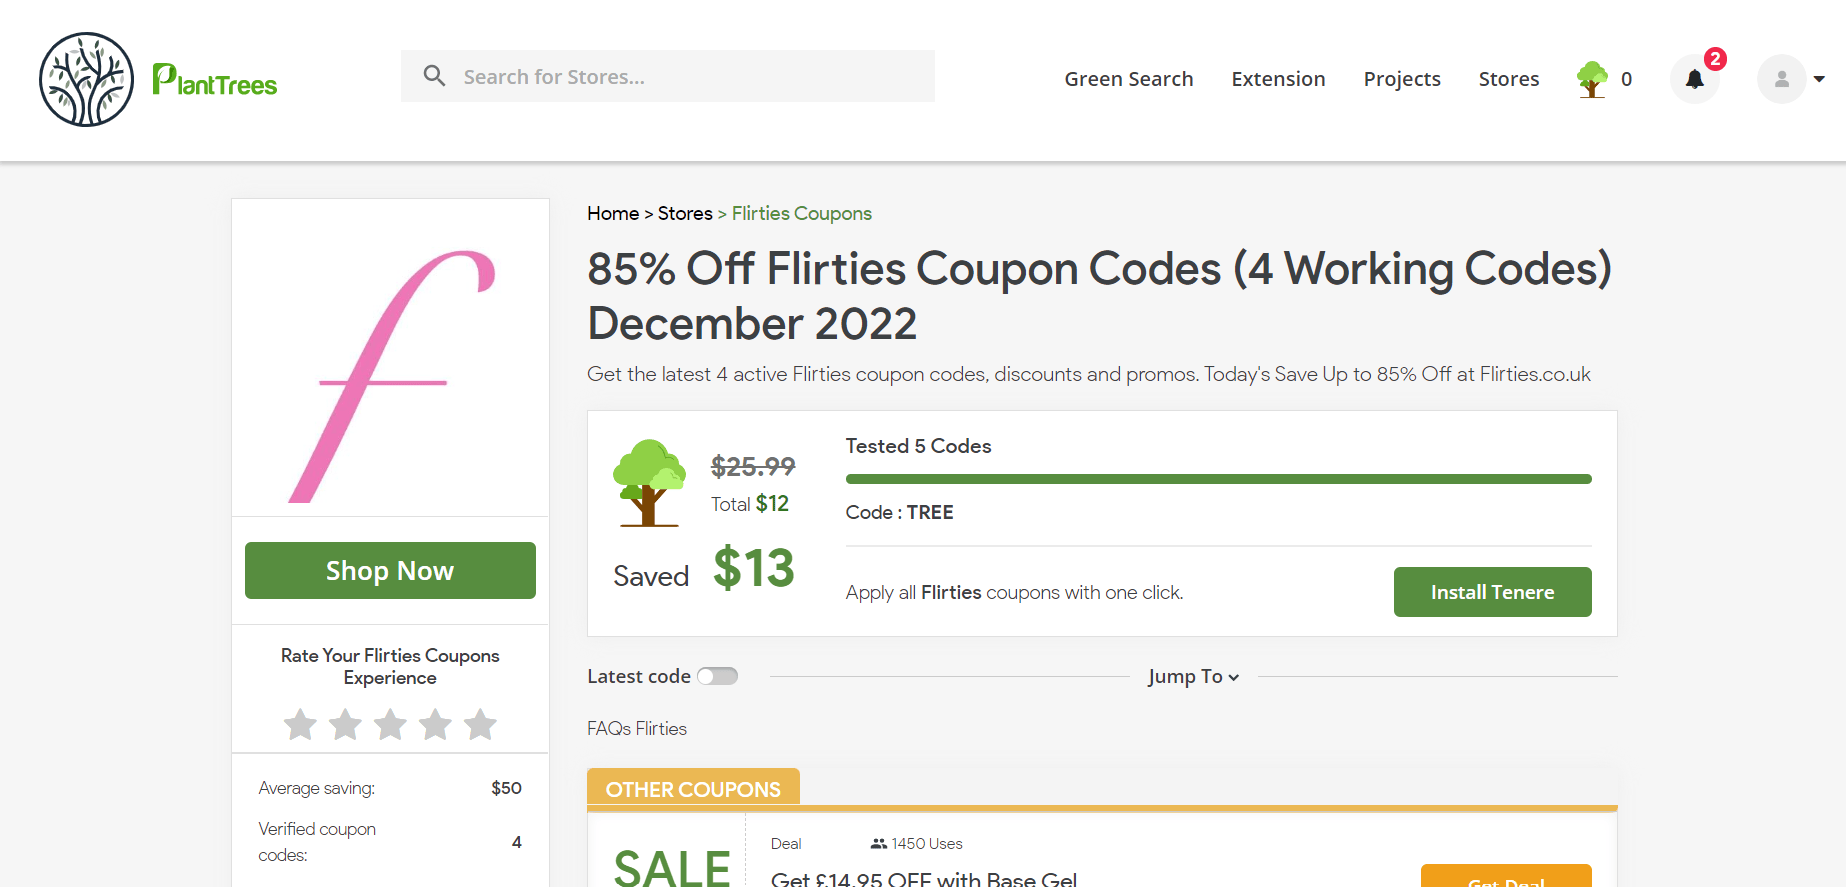 How To Use Flirties Discount Code 2